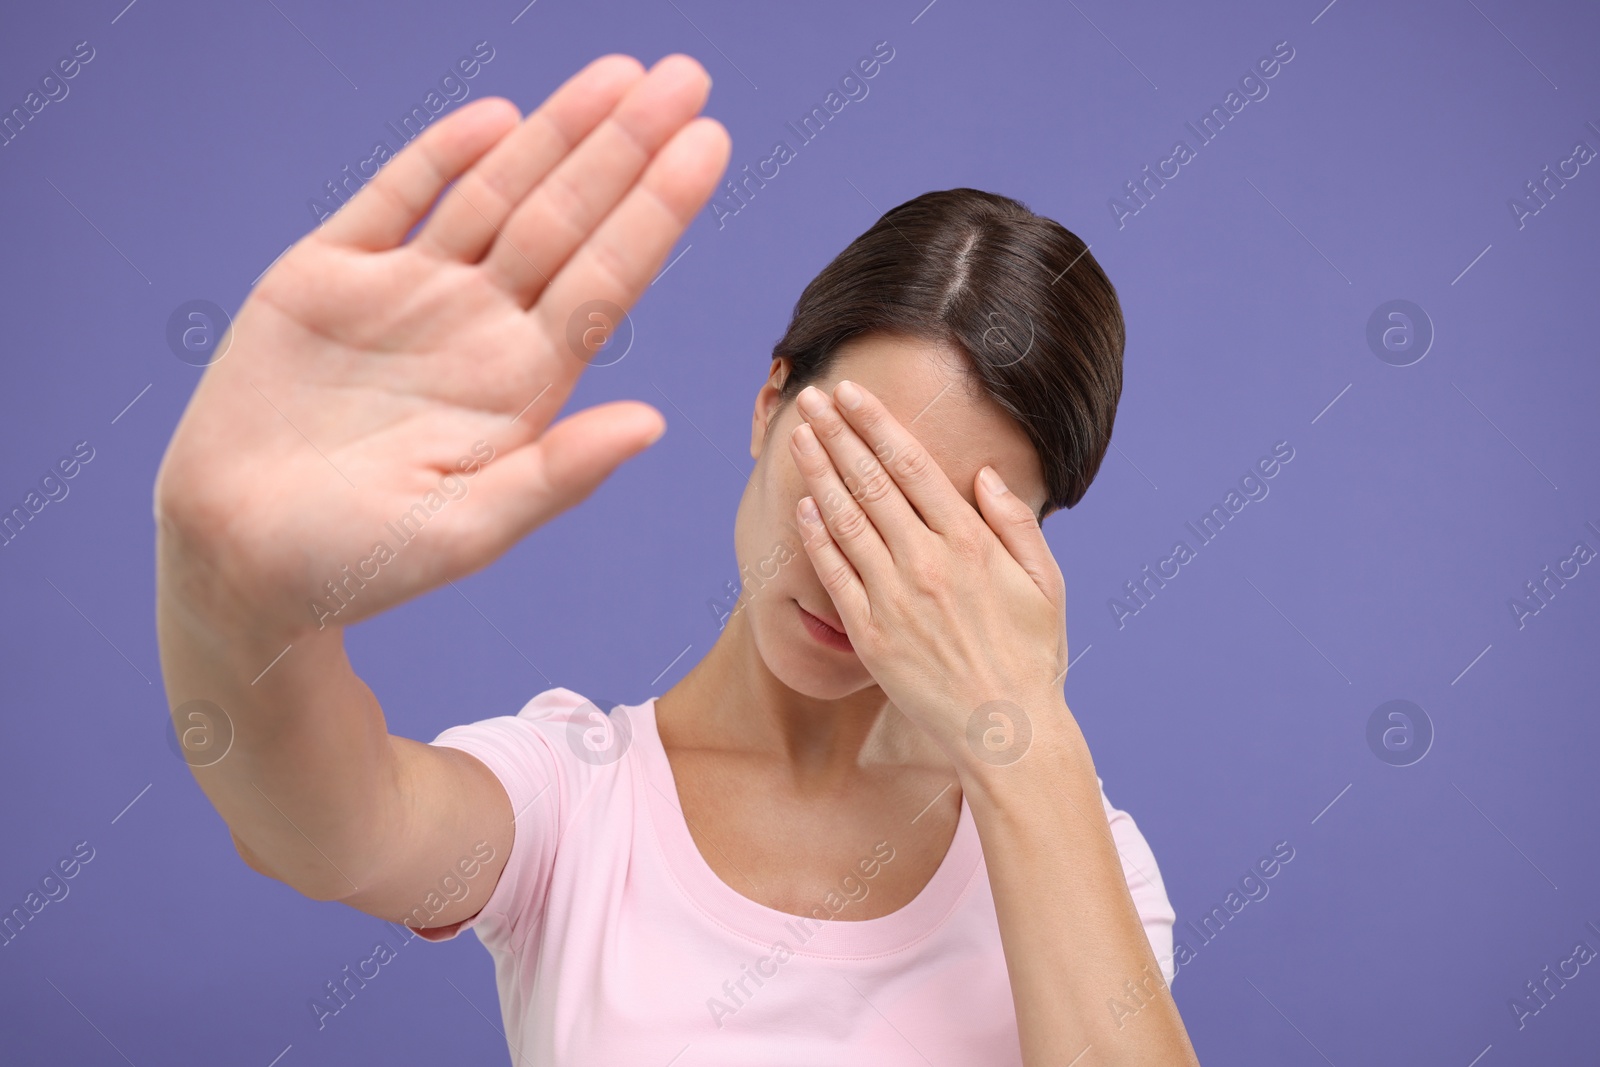 Photo of Embarrassed woman covering face with hand on violet background